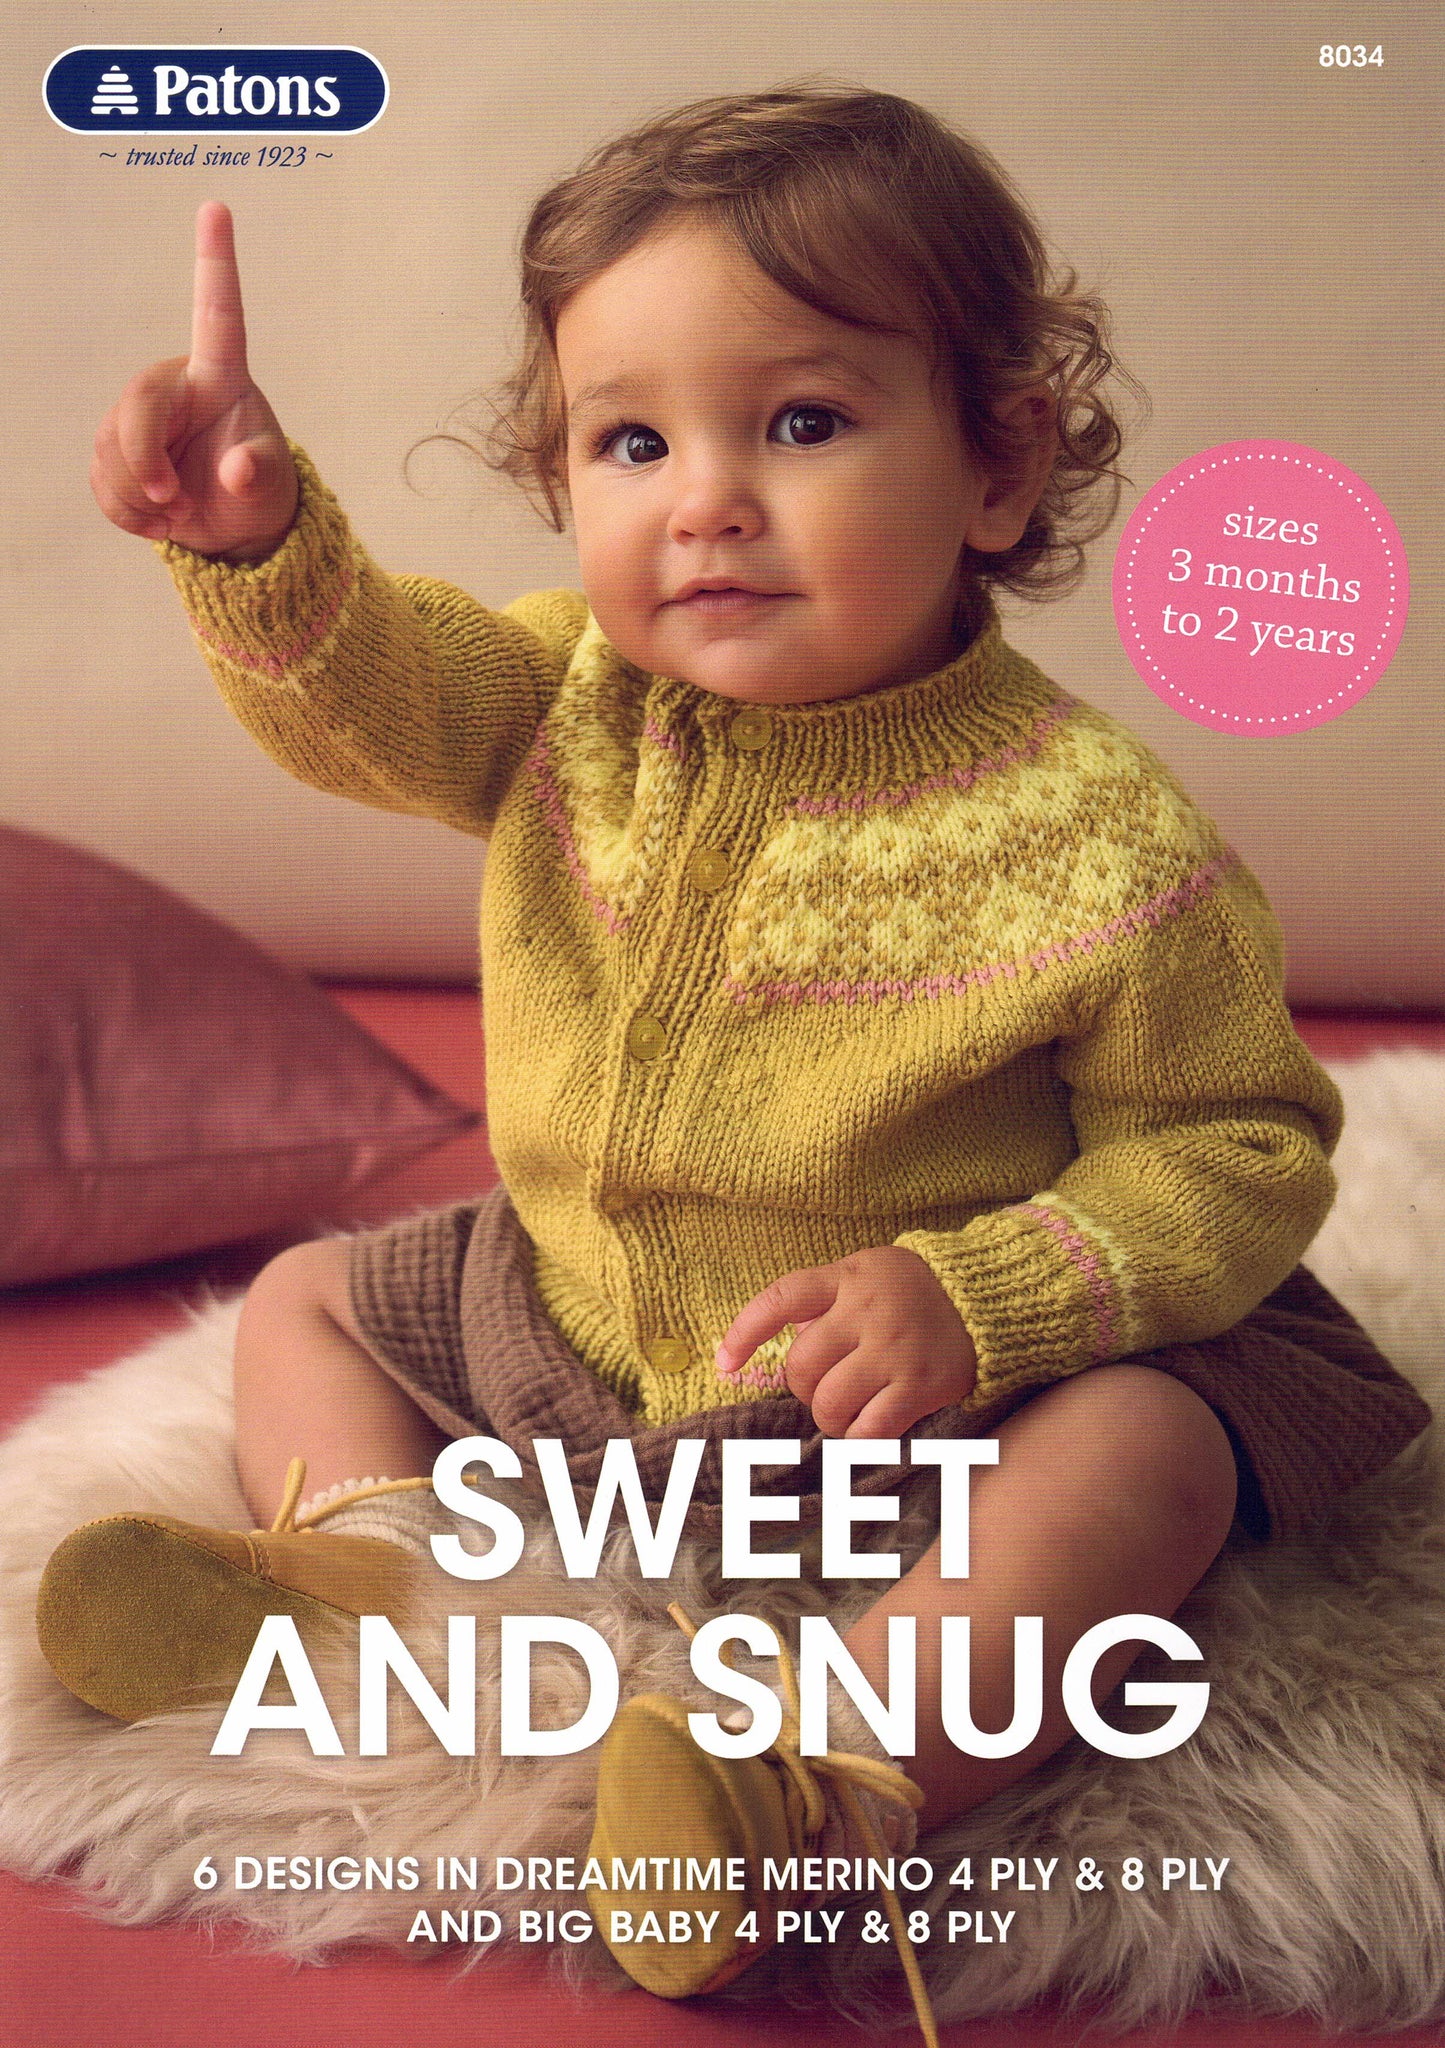 Baby/Toddler - Patons Book 8034 Sweet and Snug